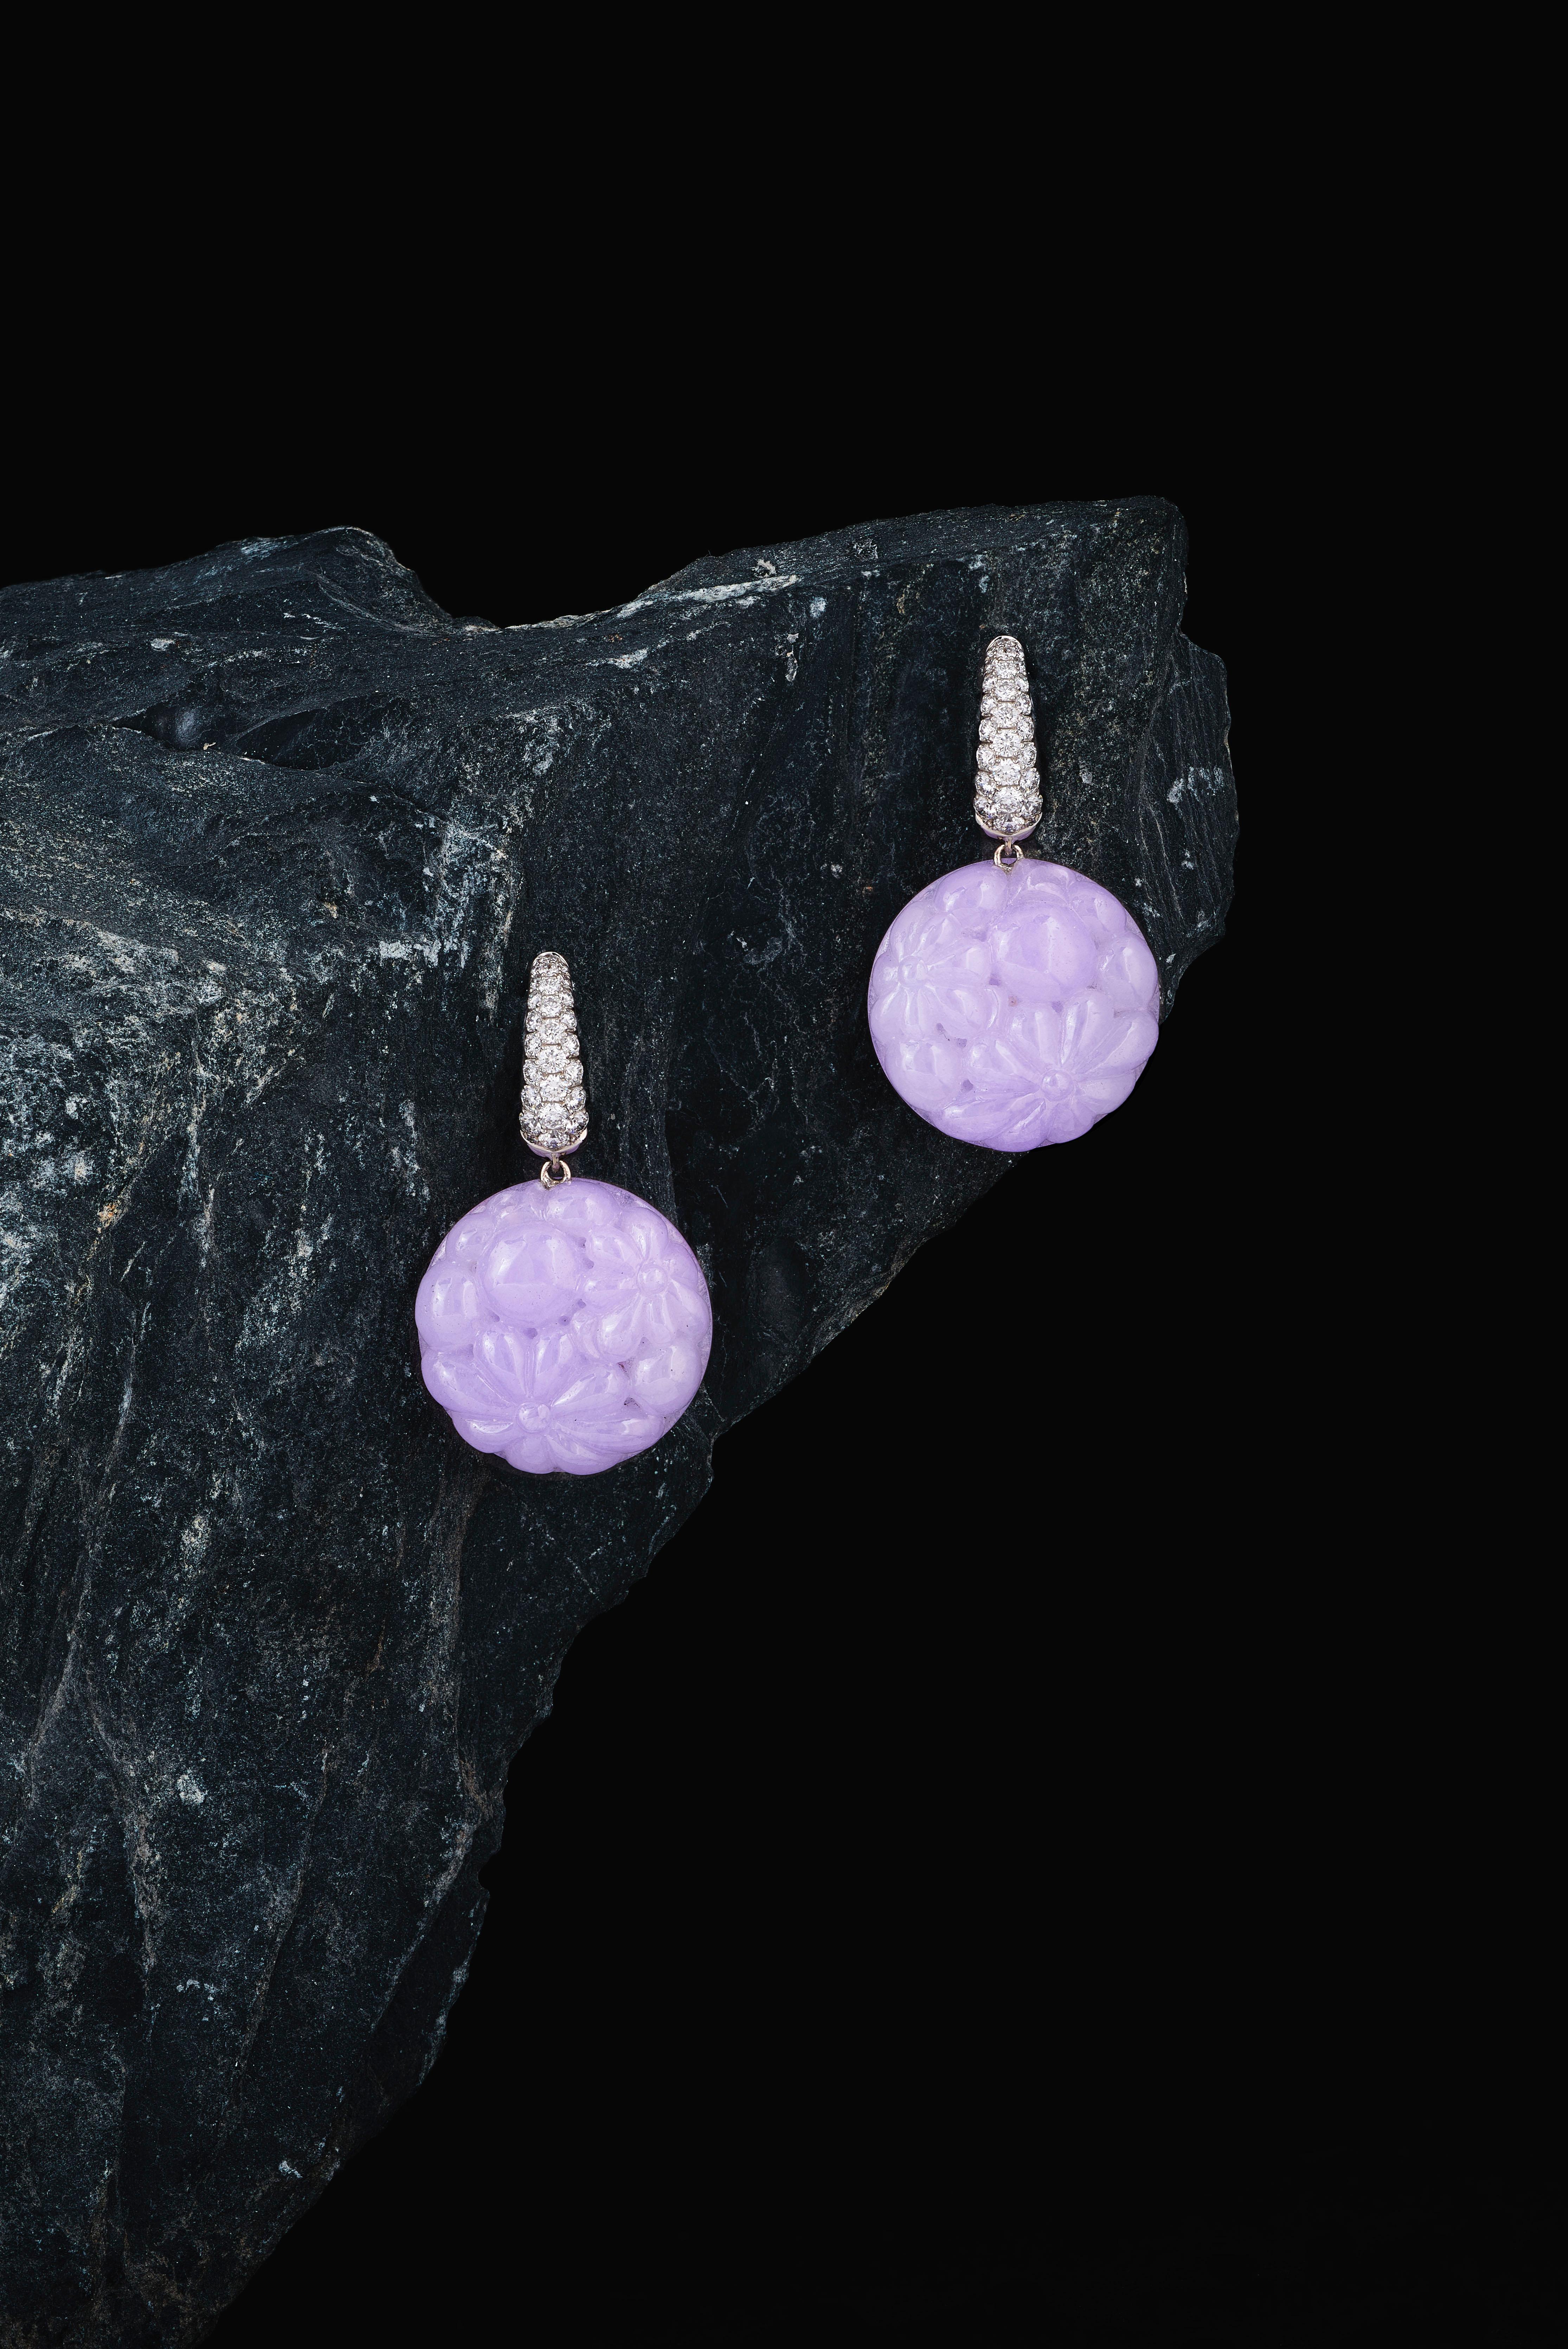 These one-off earrings are handmade in Switzerland. The earrings are made in 18K white gold with two creoles with 50 Diamonds of total 0.61 ct. F vvs and and two carved Jade discs of together 36.11 ct. in a lovely lavender color. 
You can expect the